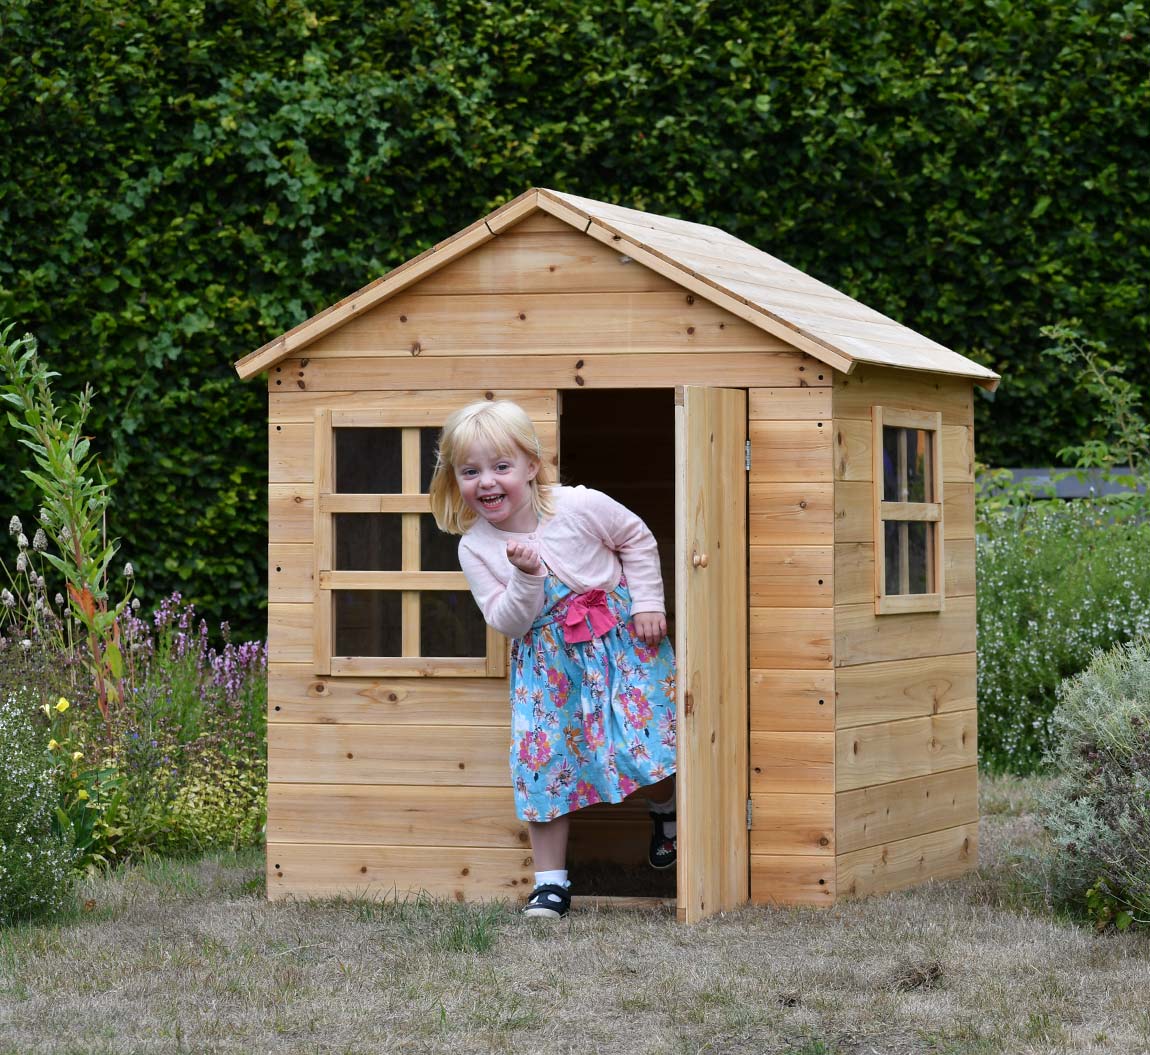 Let Your Kids Have Fun in a Wooden Playhouse - The Ultimate Guide to Adventure